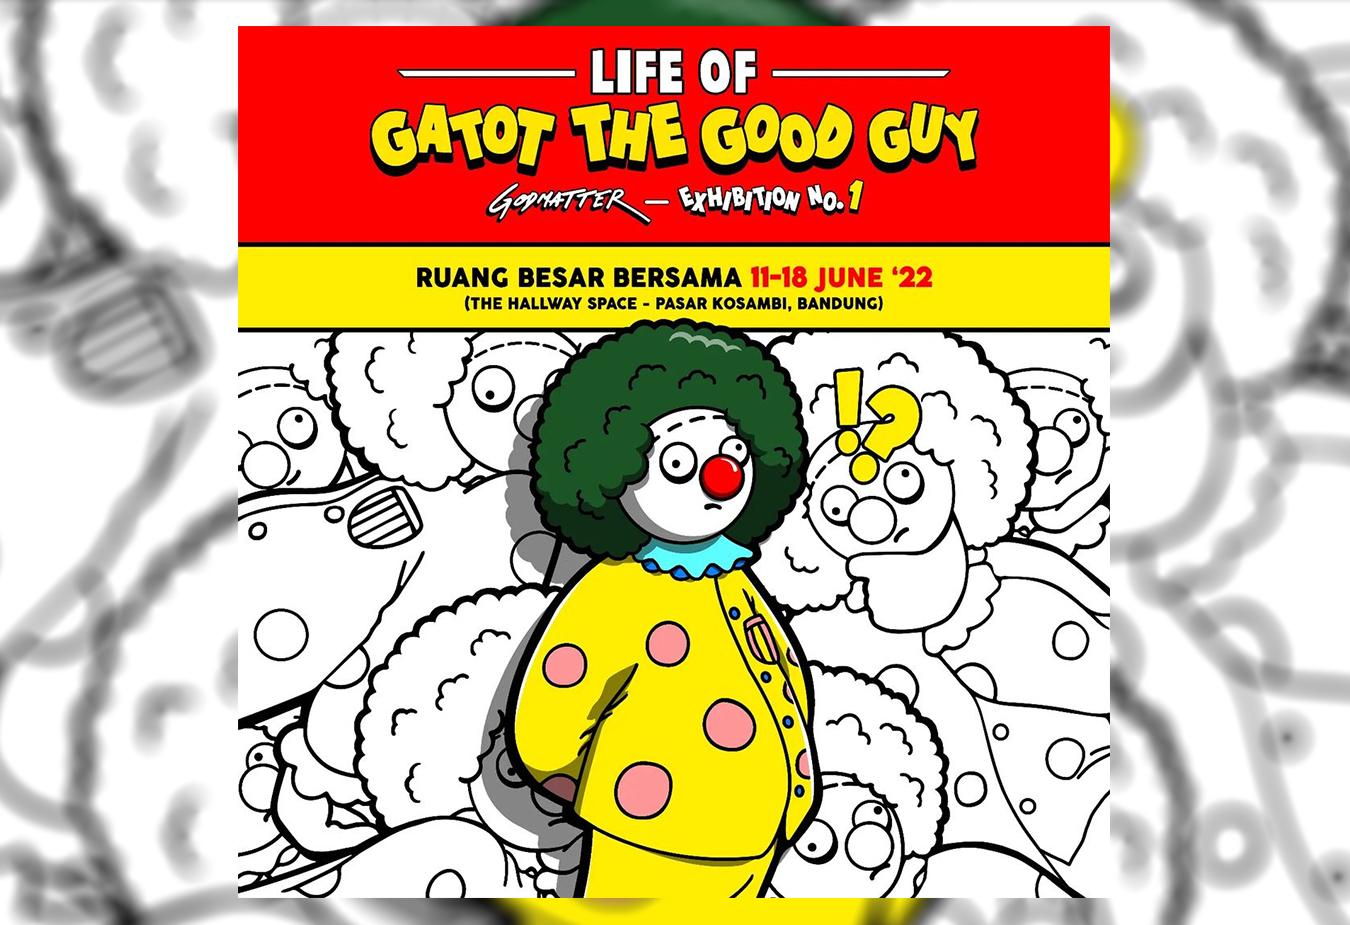 A Solo Exhibition of "Life of Gatot the Good Day"